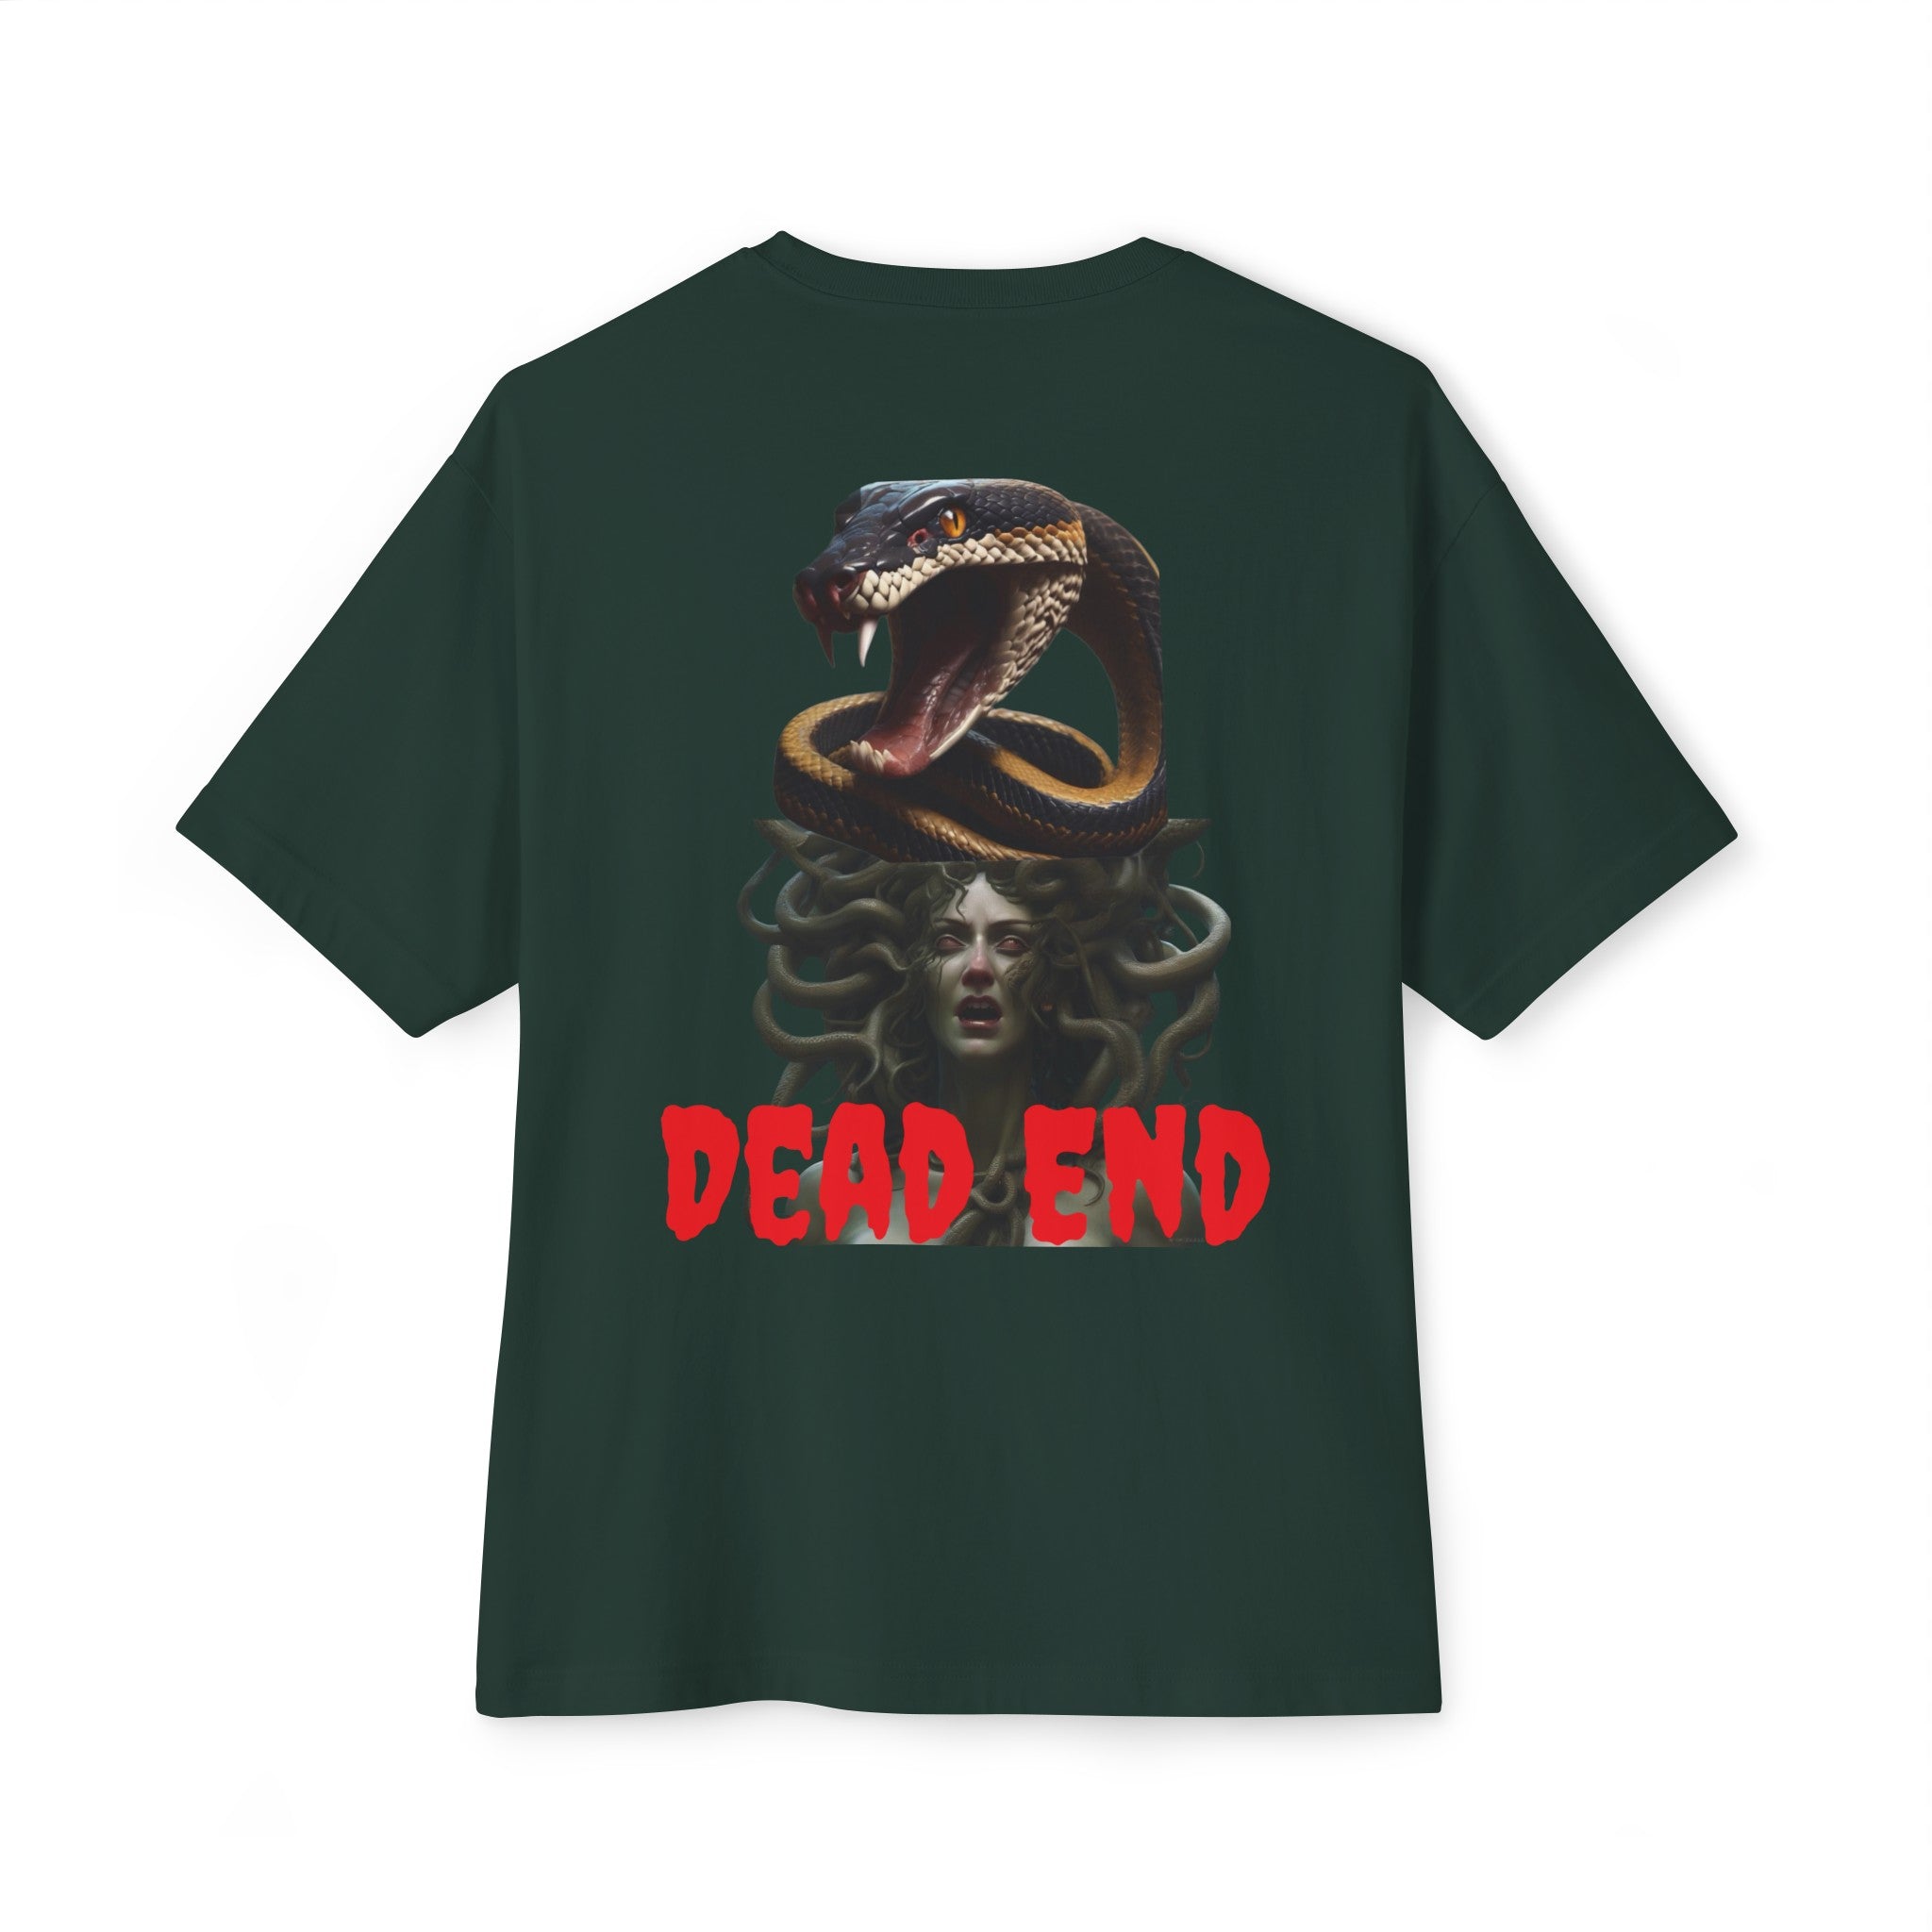 Dead End Trust None Tee